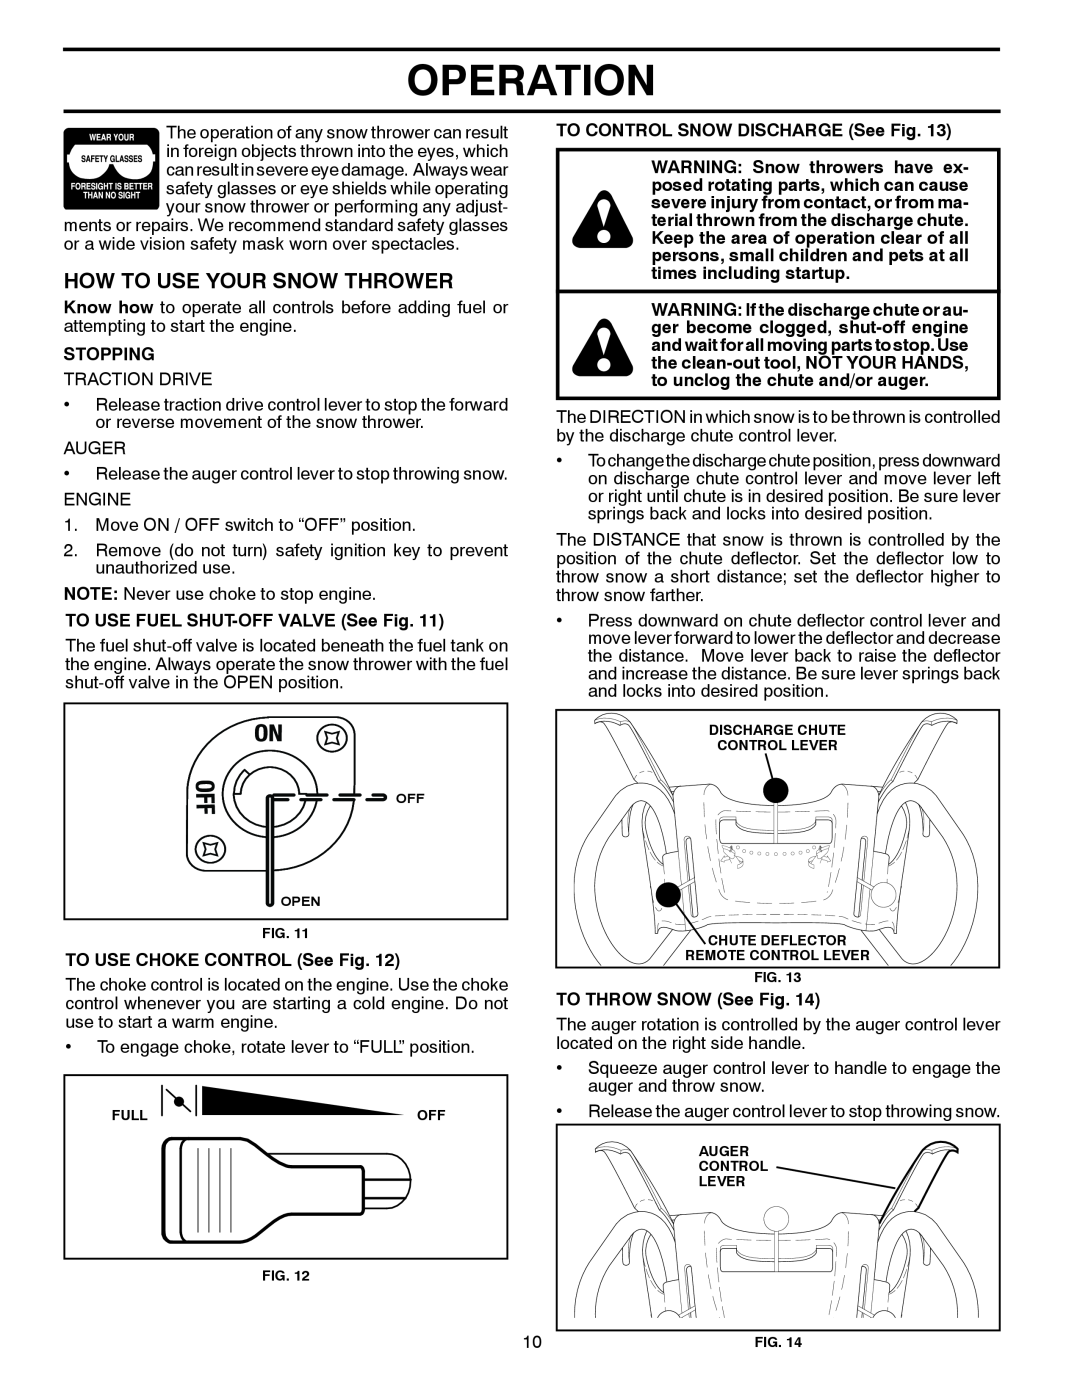 Poulan 429890 How To Use Your Snow Thrower, Operation, Stopping, TO USE FUEL SHUT-OFFVALVE See Fig, TO THROW SNOW See Fig 